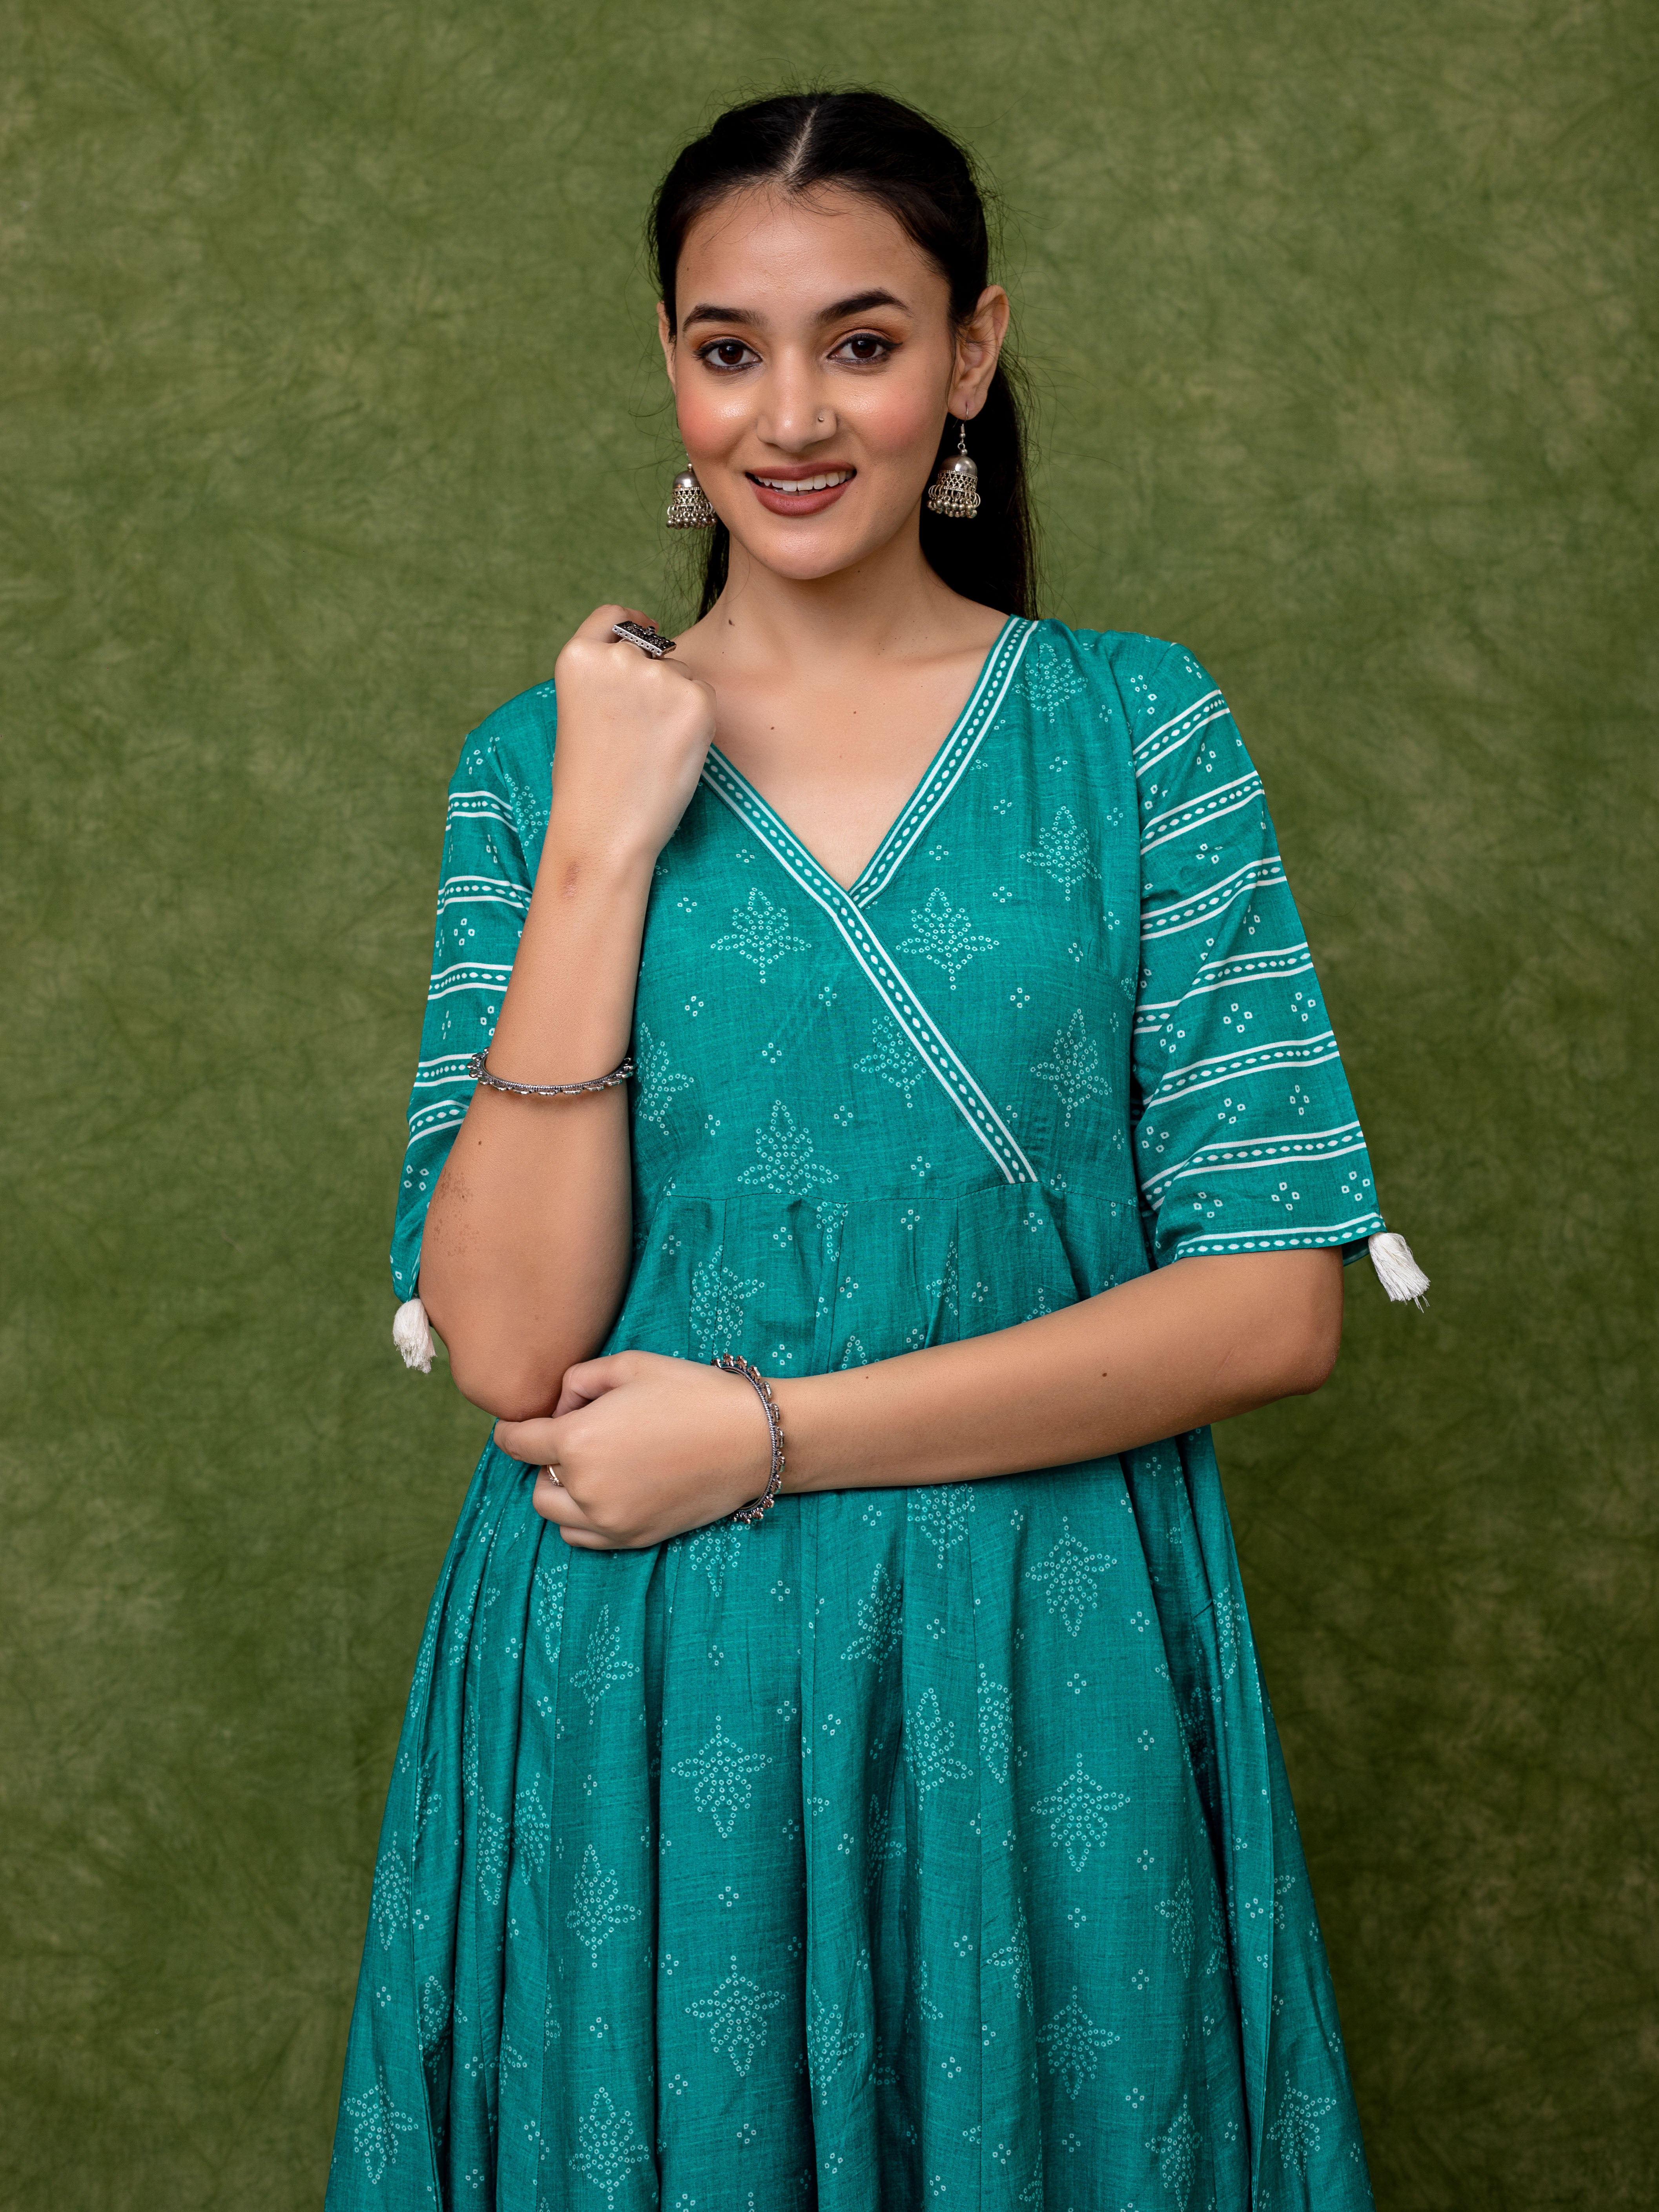 capture-timeless-charm-with-our-teal-blue-kalidaar-kurta-featuring-intricate-bandhani-buta-print-effortlessly-elegant-for-a-stunning-statement